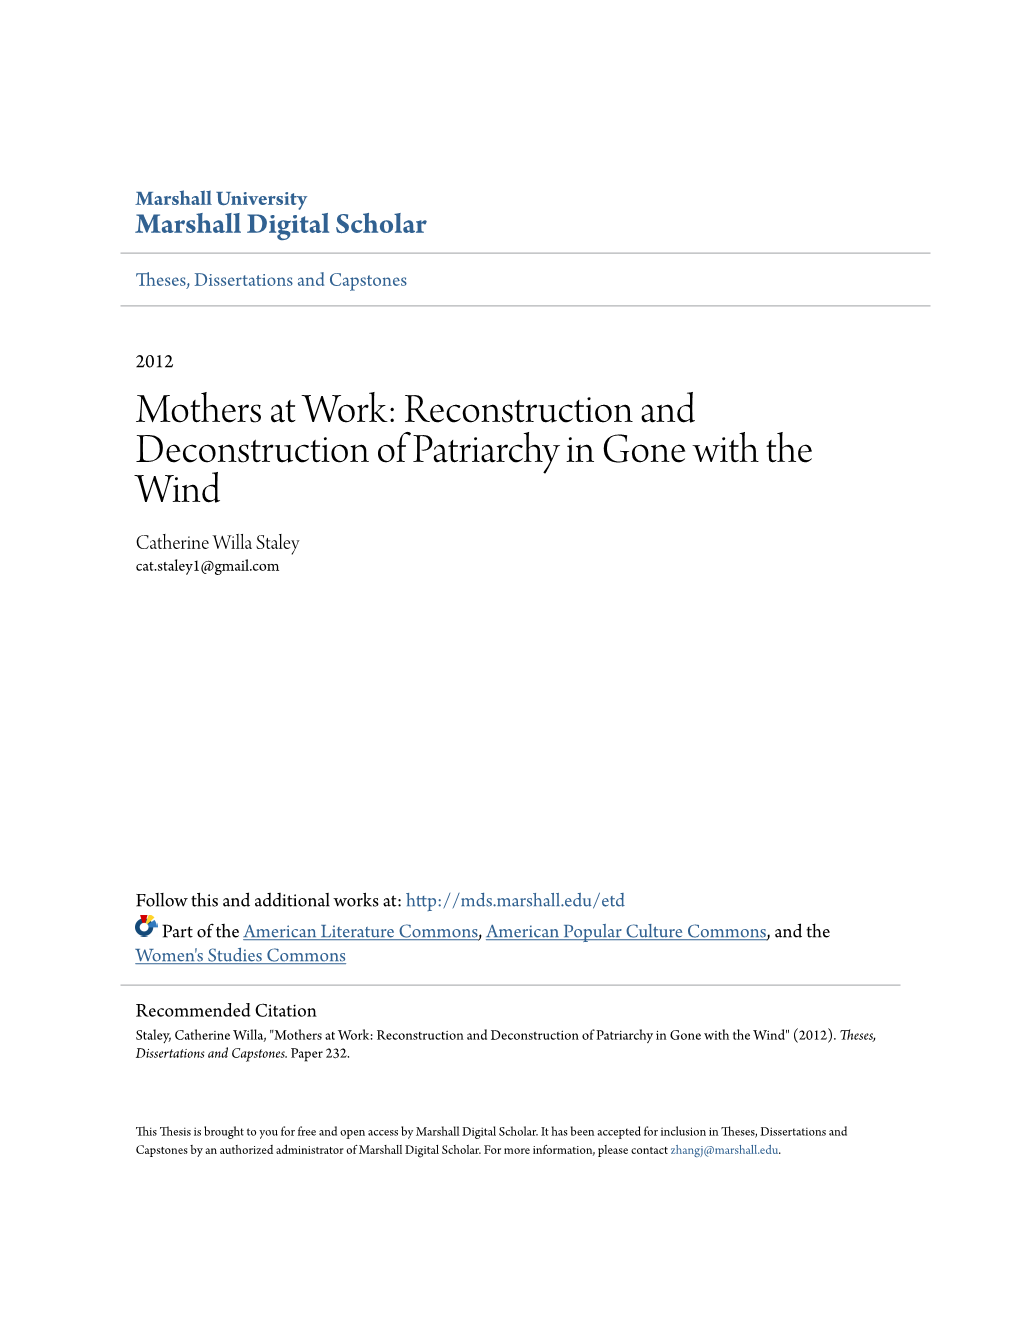 Reconstruction and Deconstruction of Patriarchy in Gone with the Wind Catherine Willa Staley Cat.Staley1@Gmail.Com